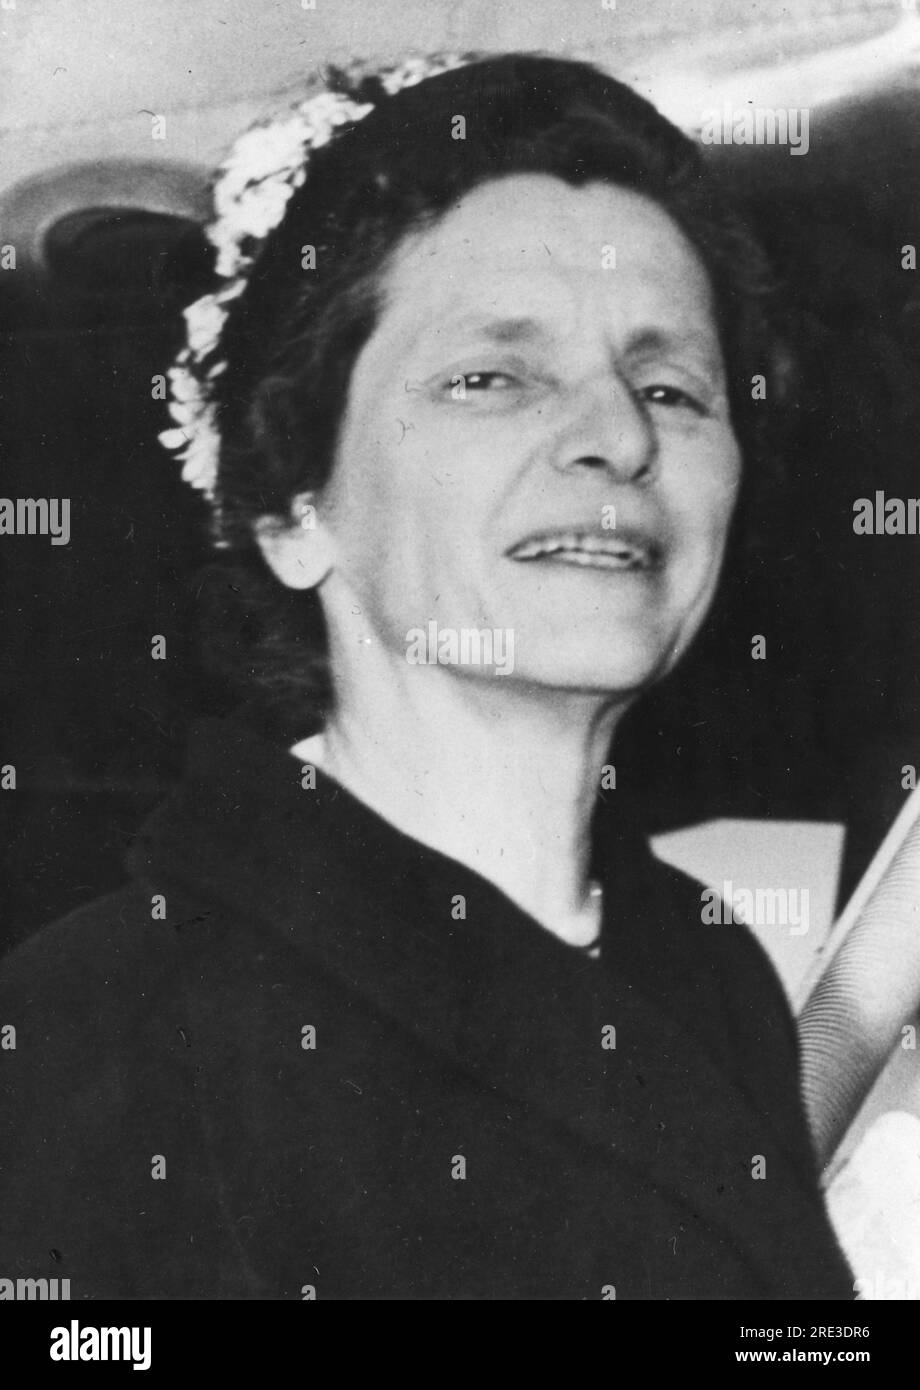 Willis, Frances E., 20.5.1899 - 23.7.1983, American diplomat, as ambassador to Switzerland, ADDITIONAL-RIGHTS-CLEARANCE-INFO-NOT-AVAILABLE Stock Photo